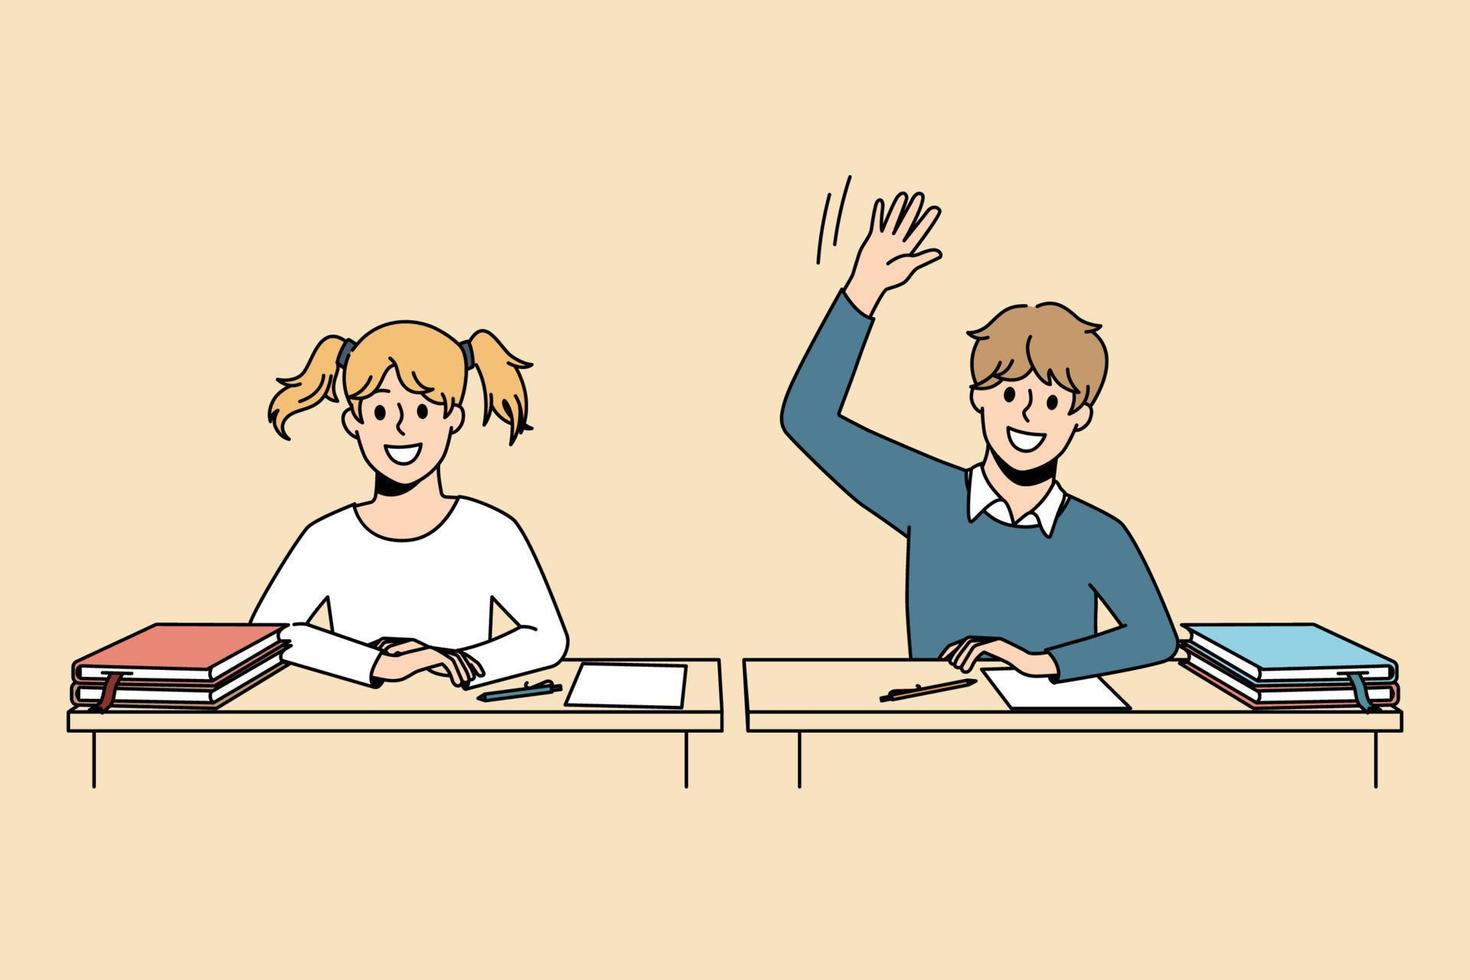 Educational process and learning concept. Smiling pupils boy and girl sitting at lesson and raising hand ready to answer having knowledge vector illustration